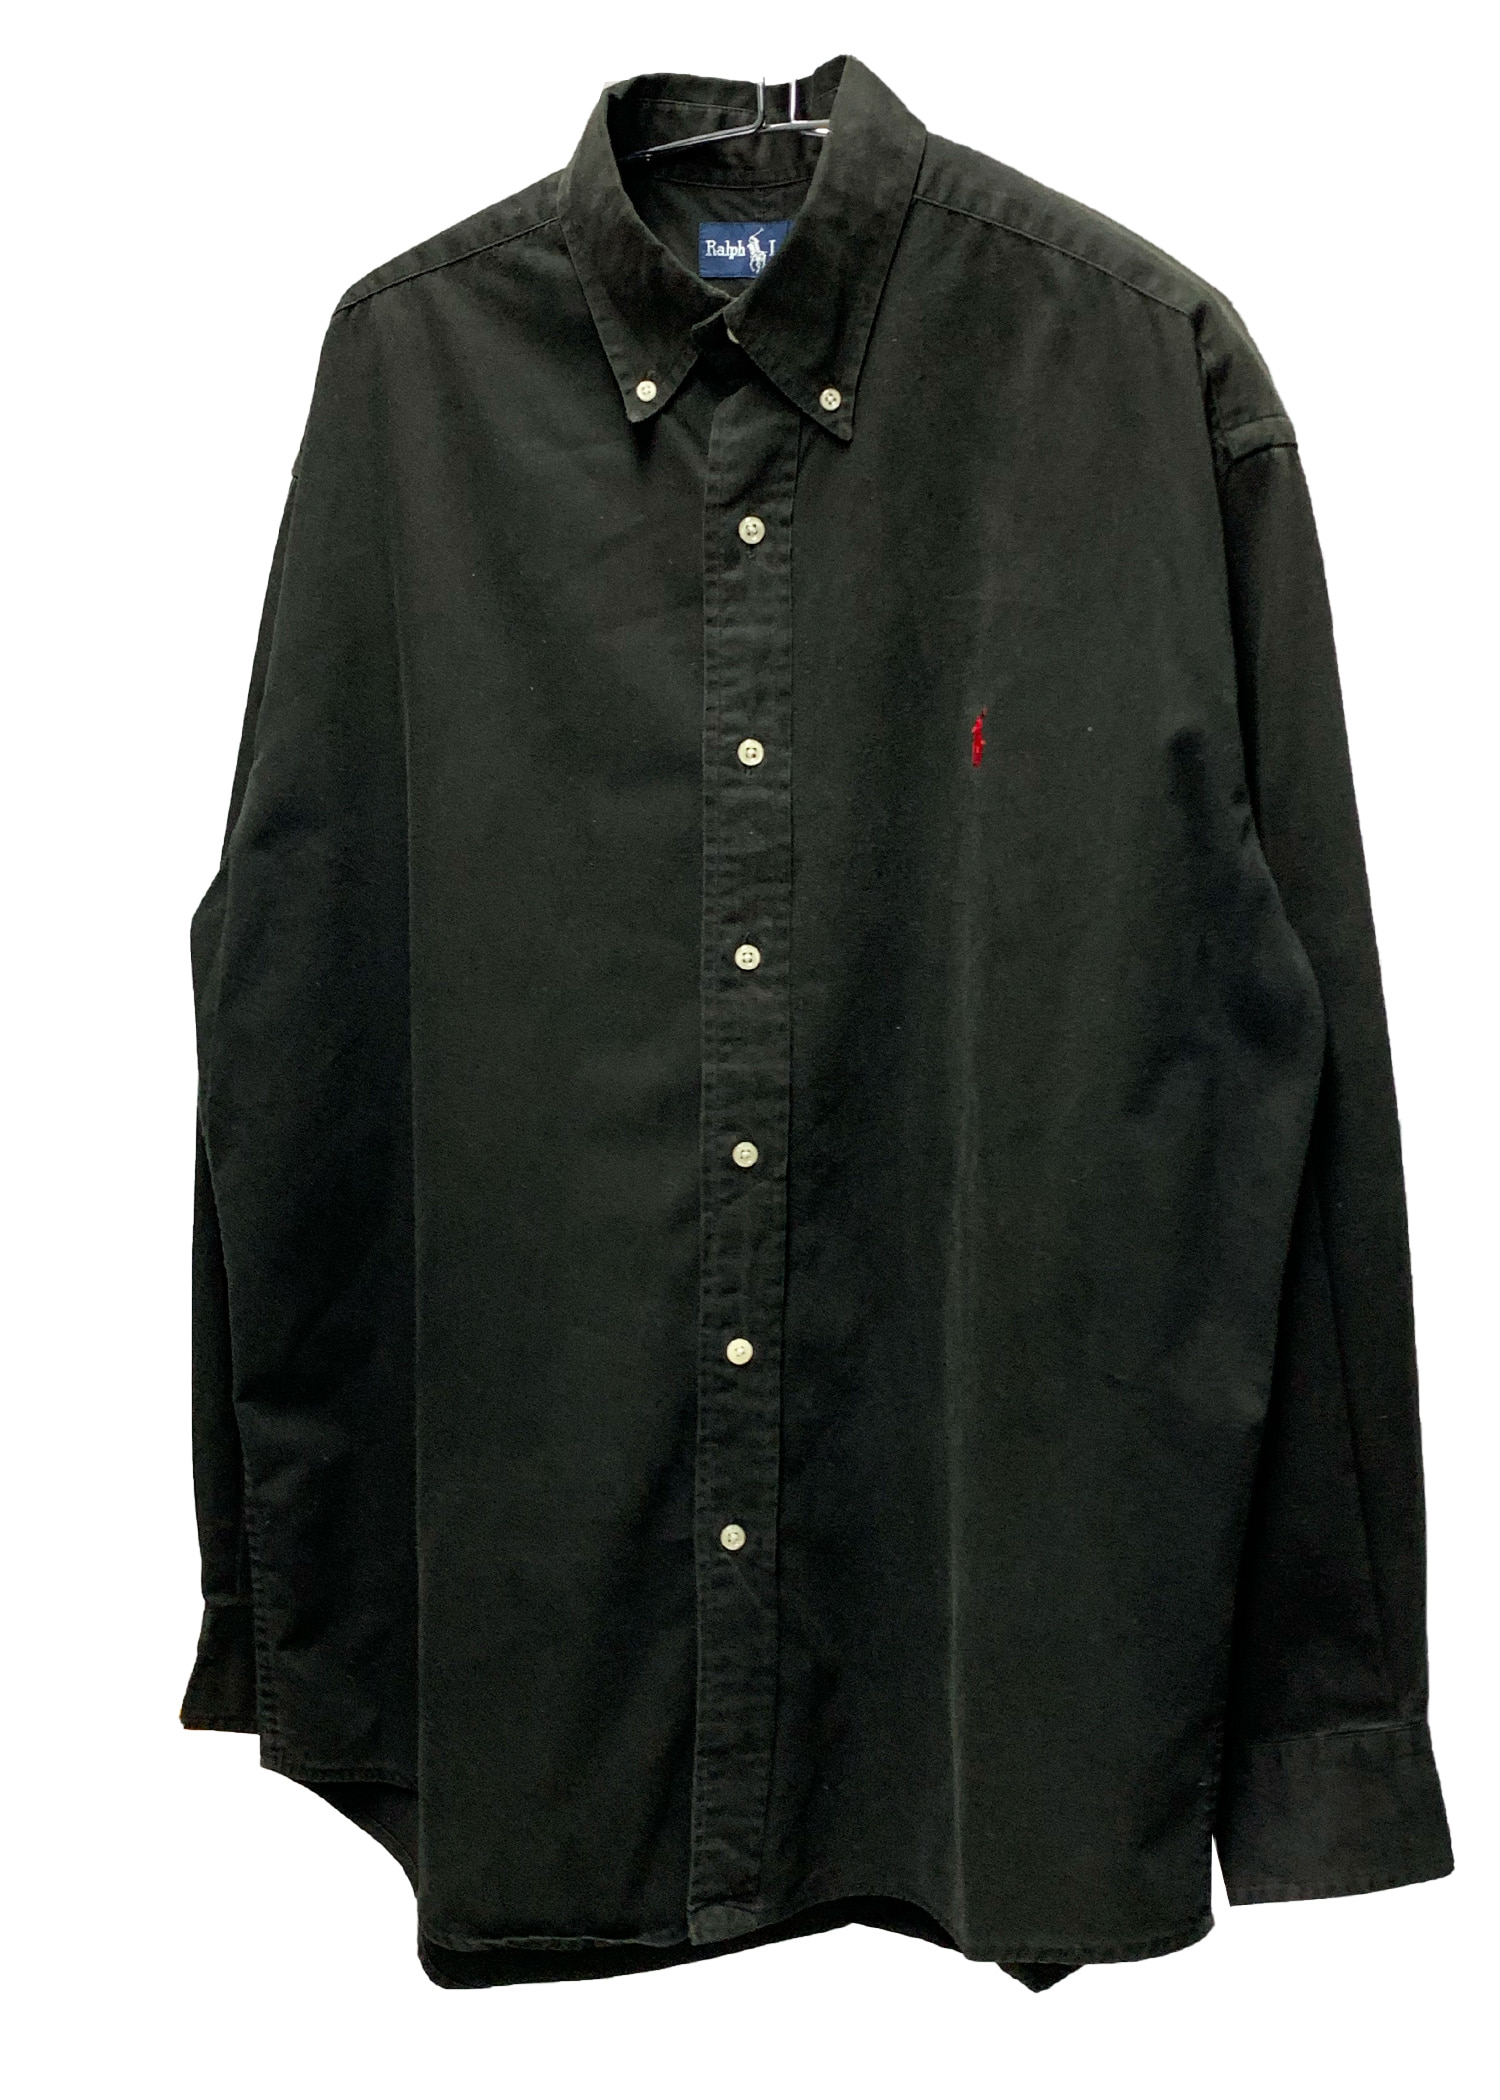 Polo by Ralph Lauren oxford shirts